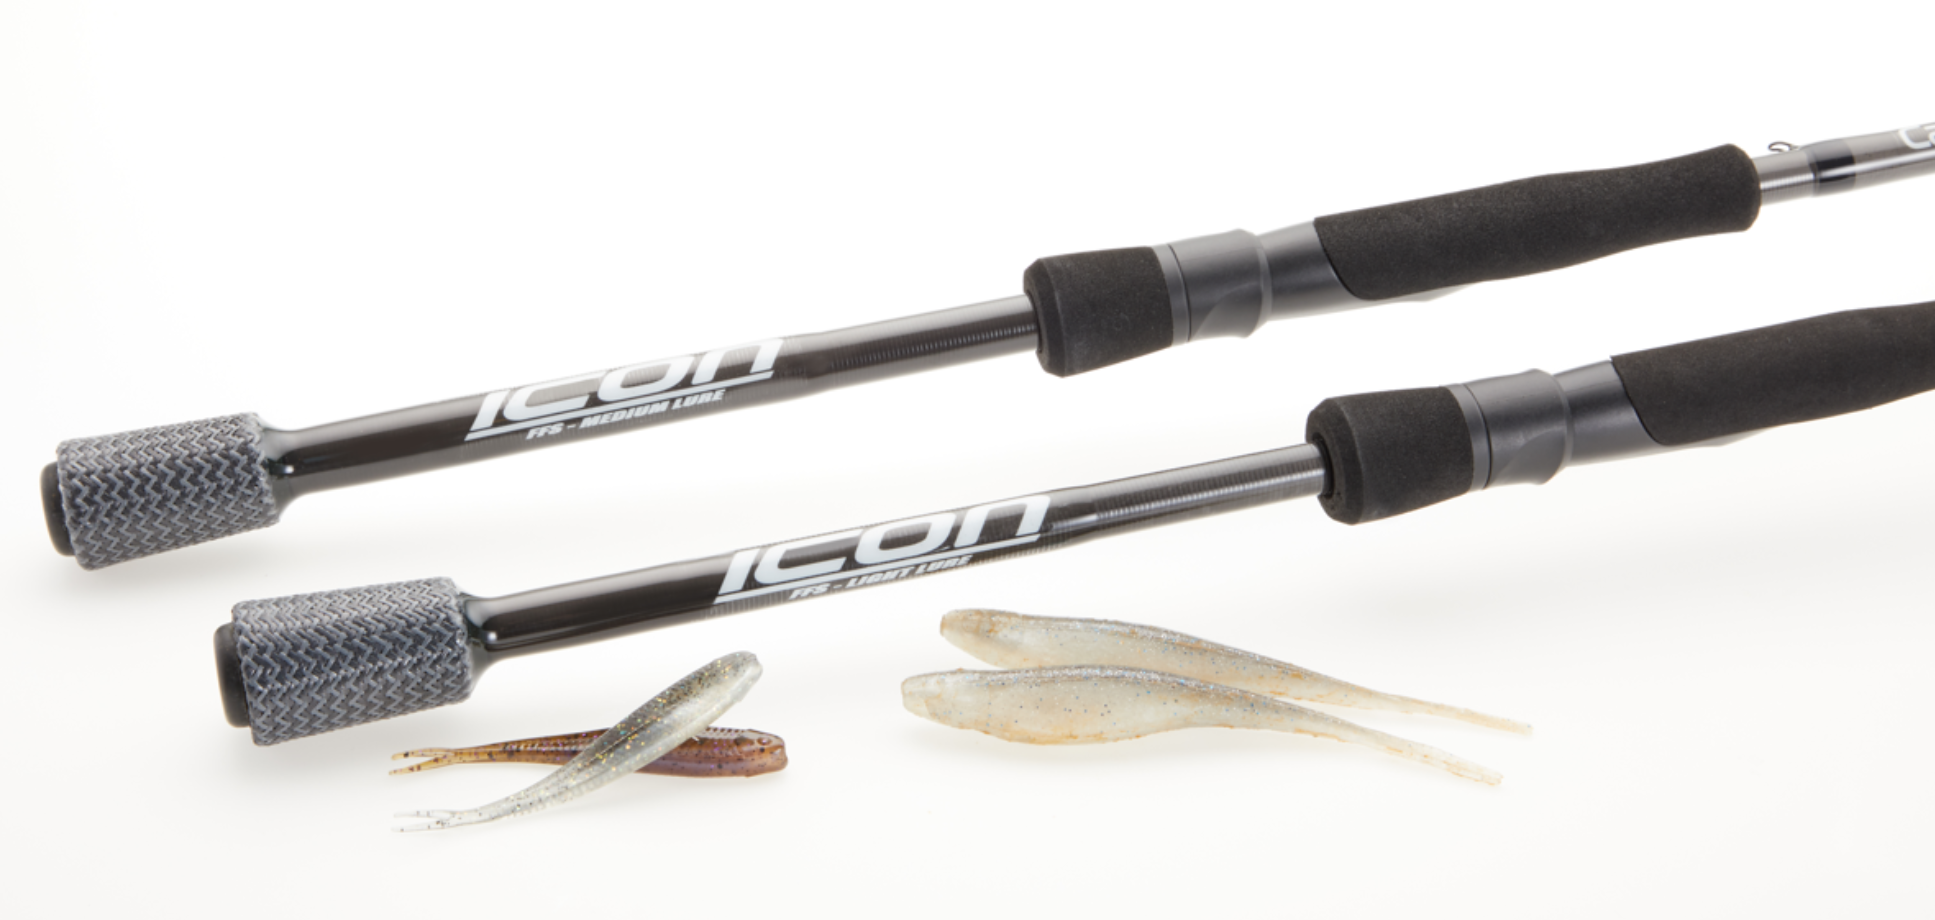 Our Reel Seats – Big Bear Fishing Rods